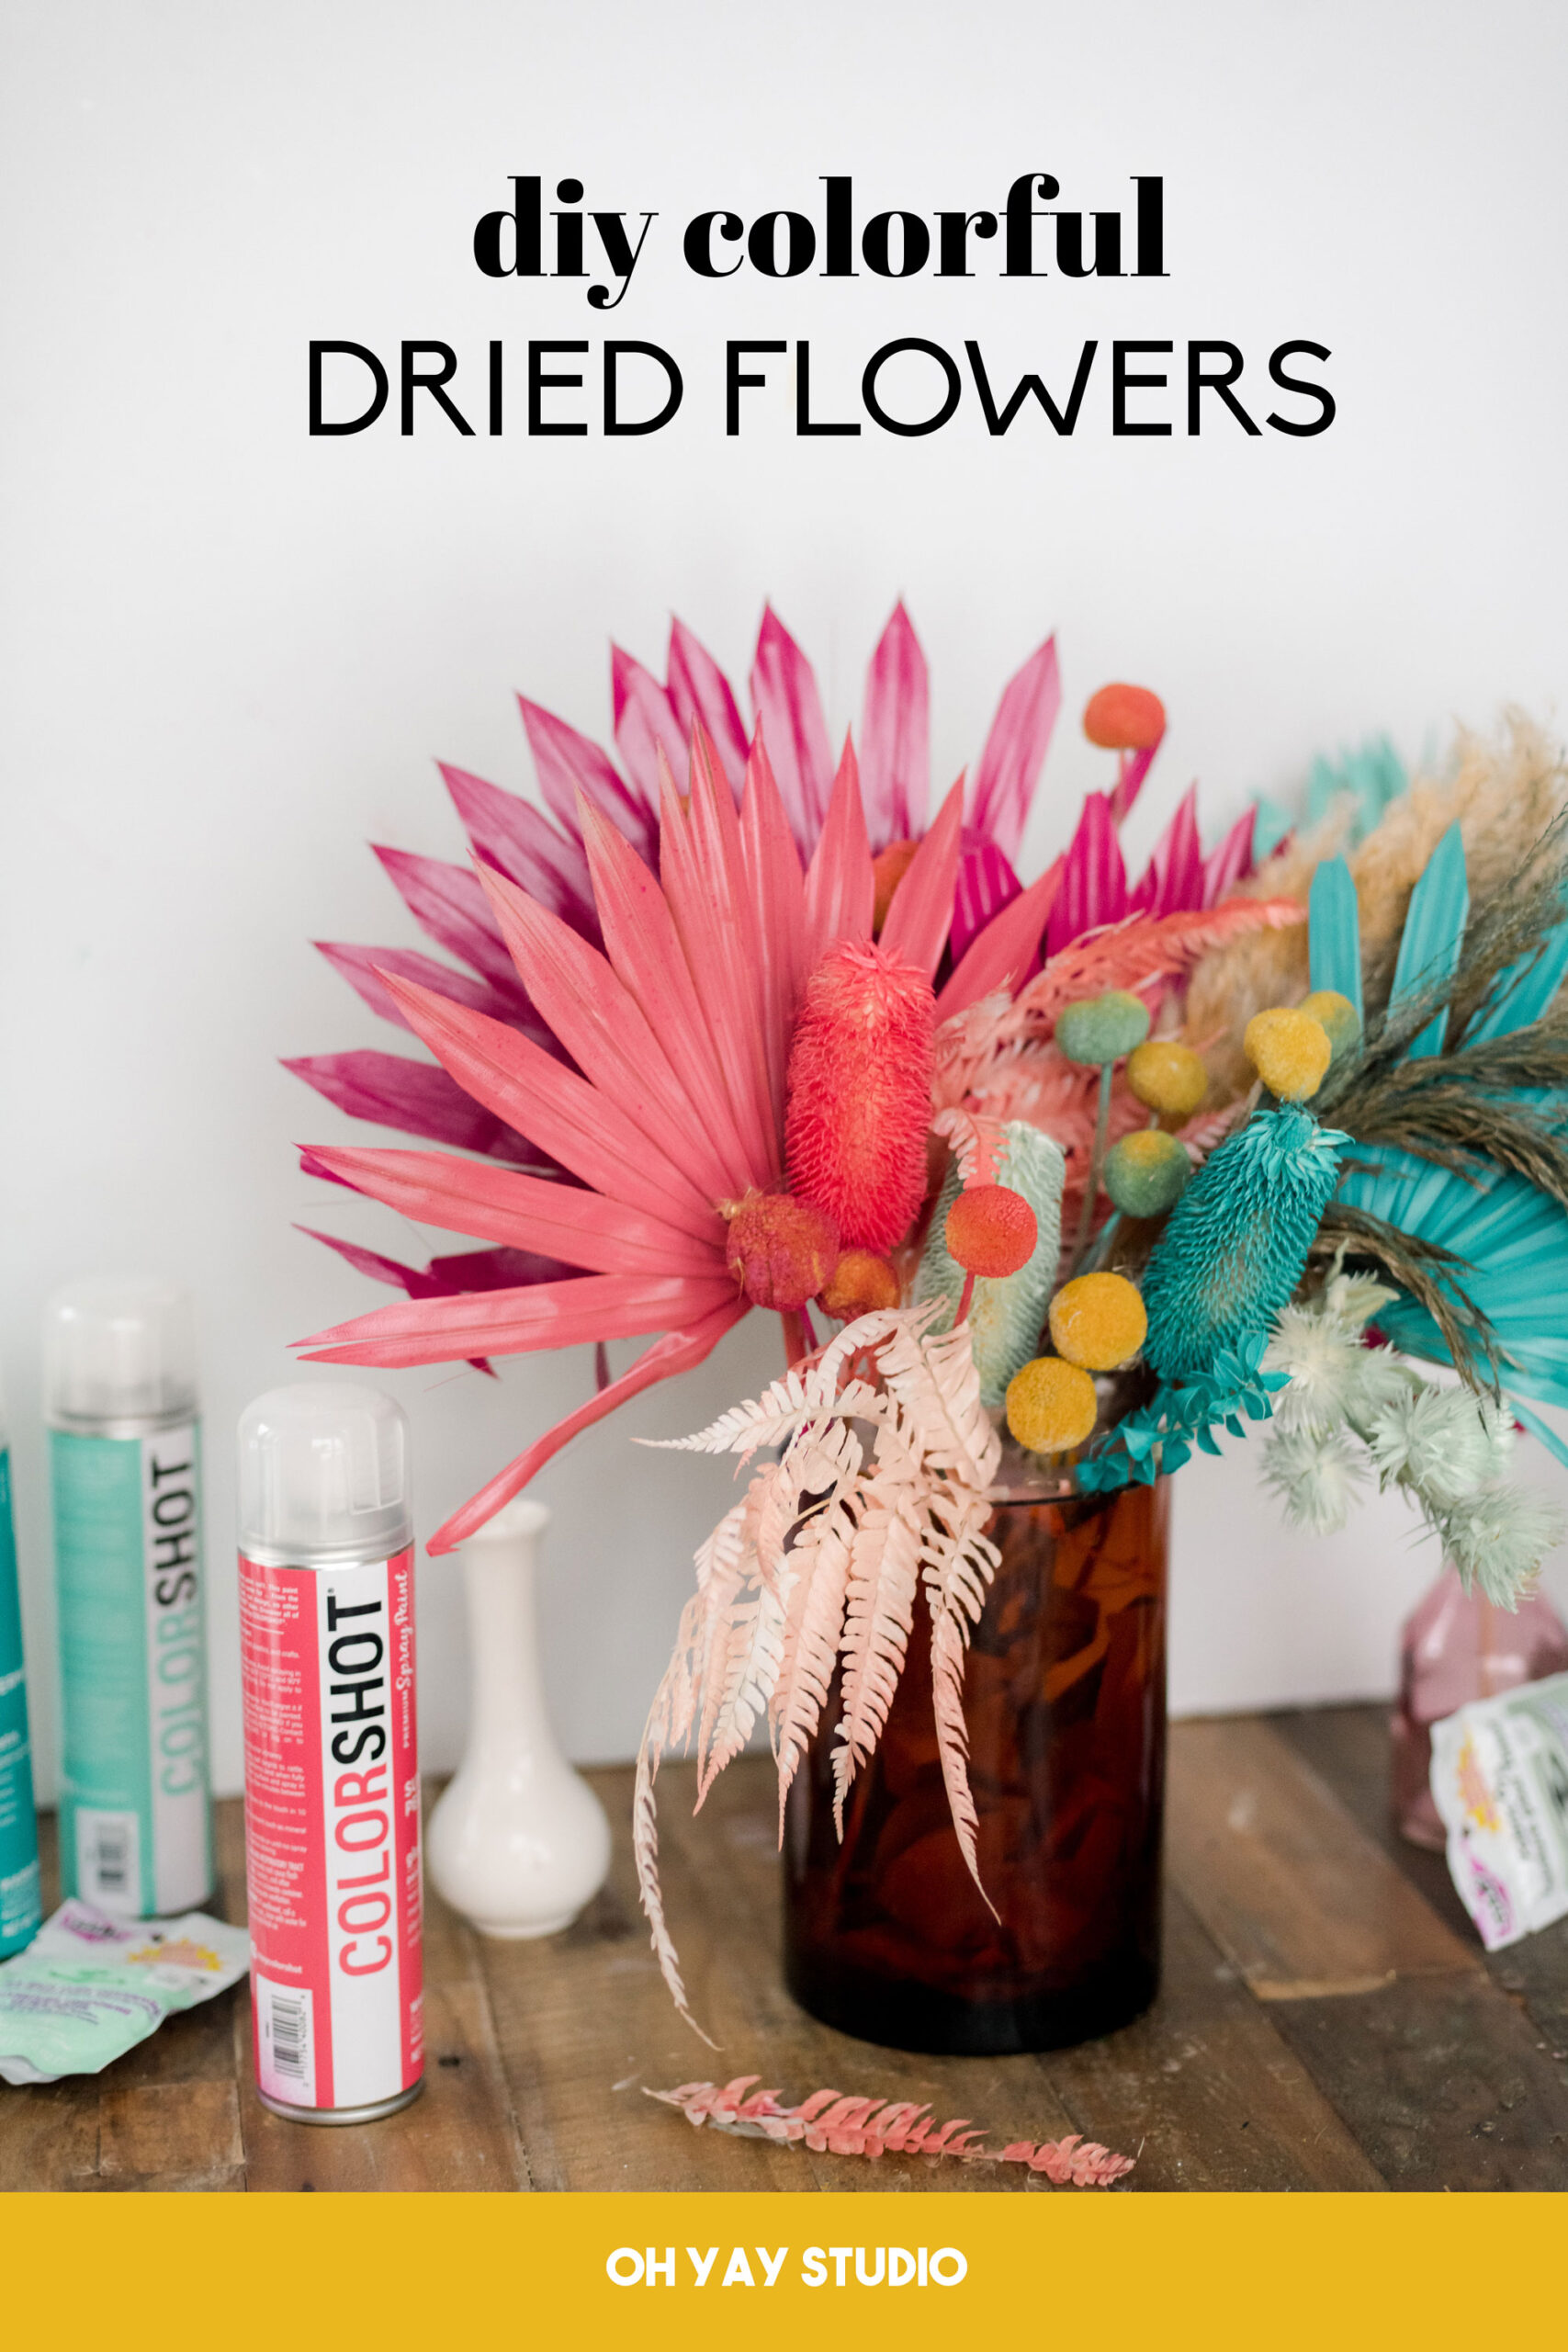 DIY colorful dried flowers, colorshot dried flowers, colorshot paint DIY, how to make colorful dried flowers, colorful dried floral arrangement DIY